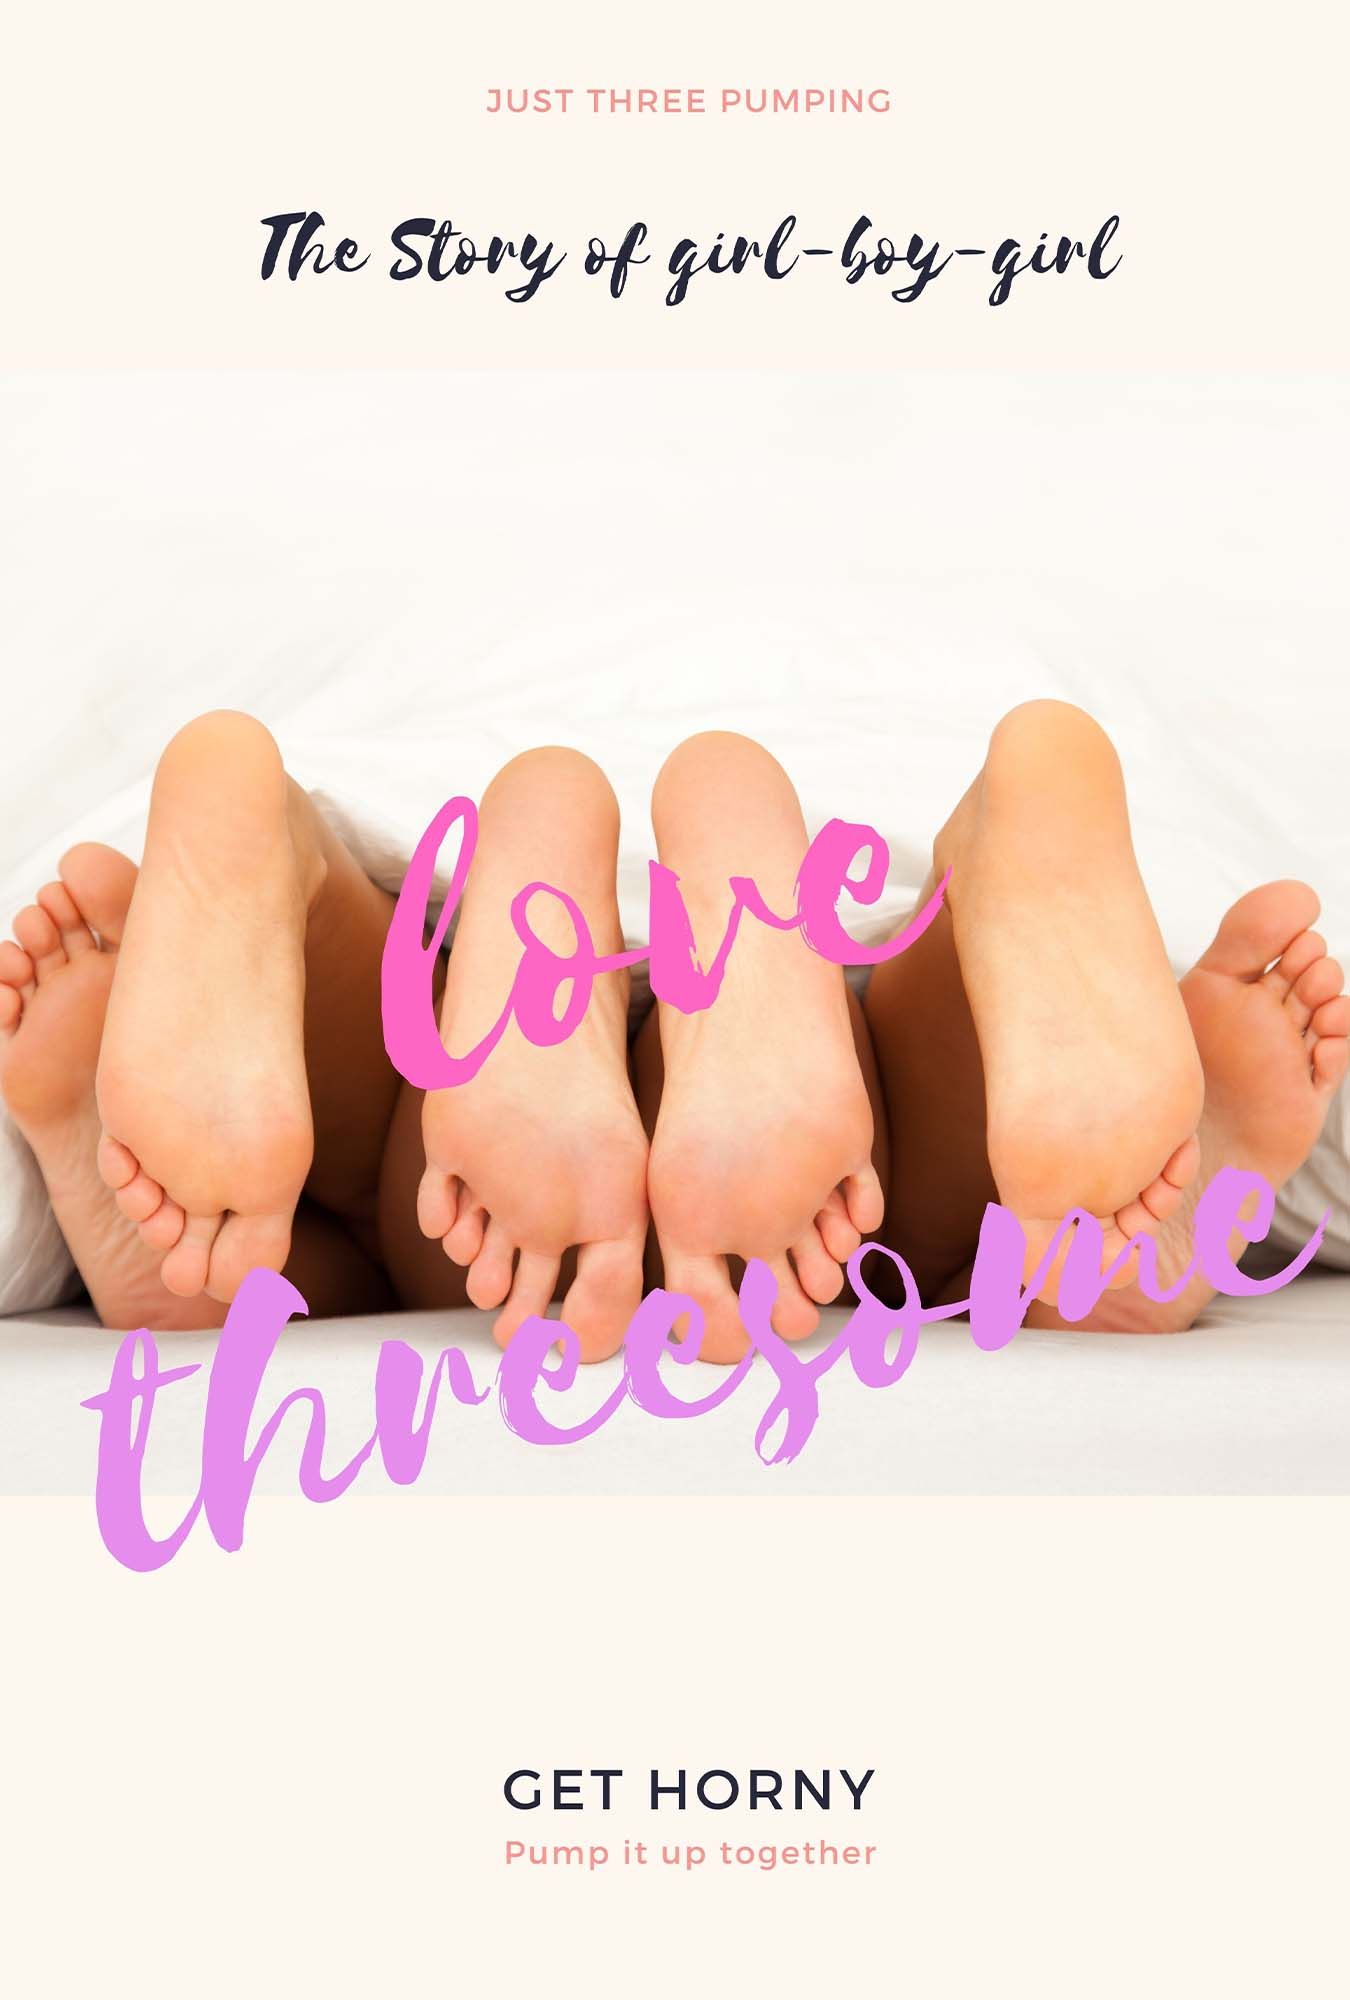 Love threesome, the story of girl-boy-girl and sex